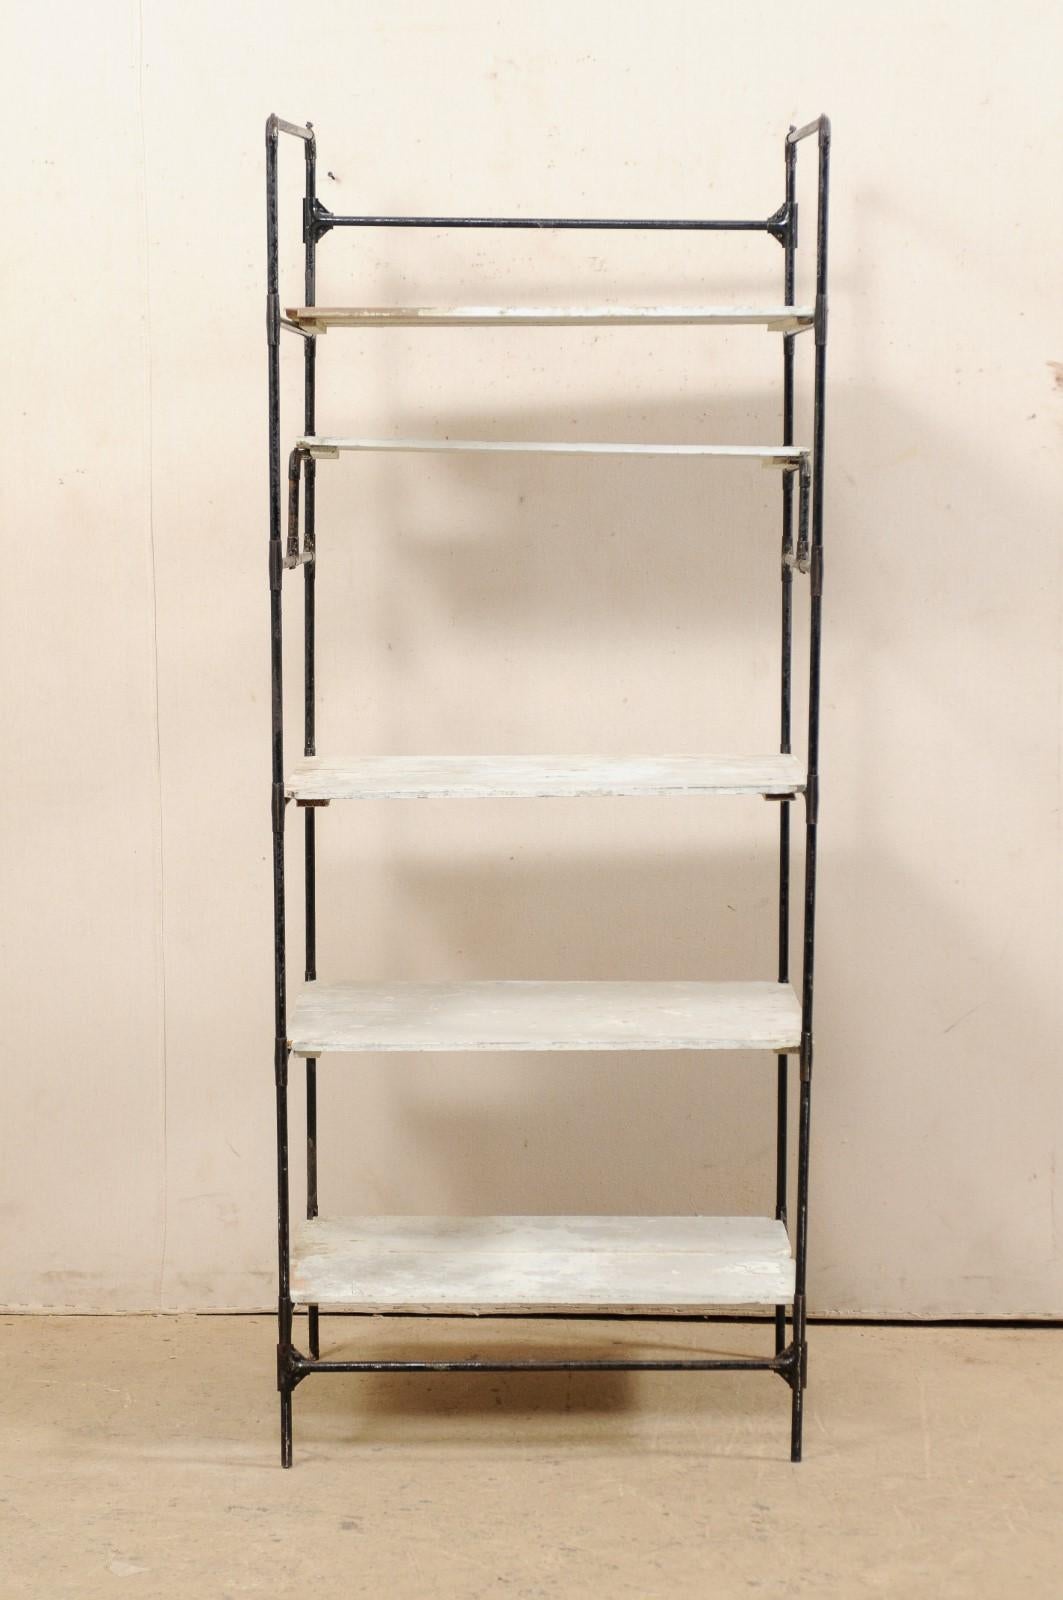 A Spanish artisan created tall open shelving unit from the mid-20th century. This vintage rack from Spain, standing just over 6 feet in height and approximately 30 inches deep, features painted wood shelves resting within a metal frame. This storage